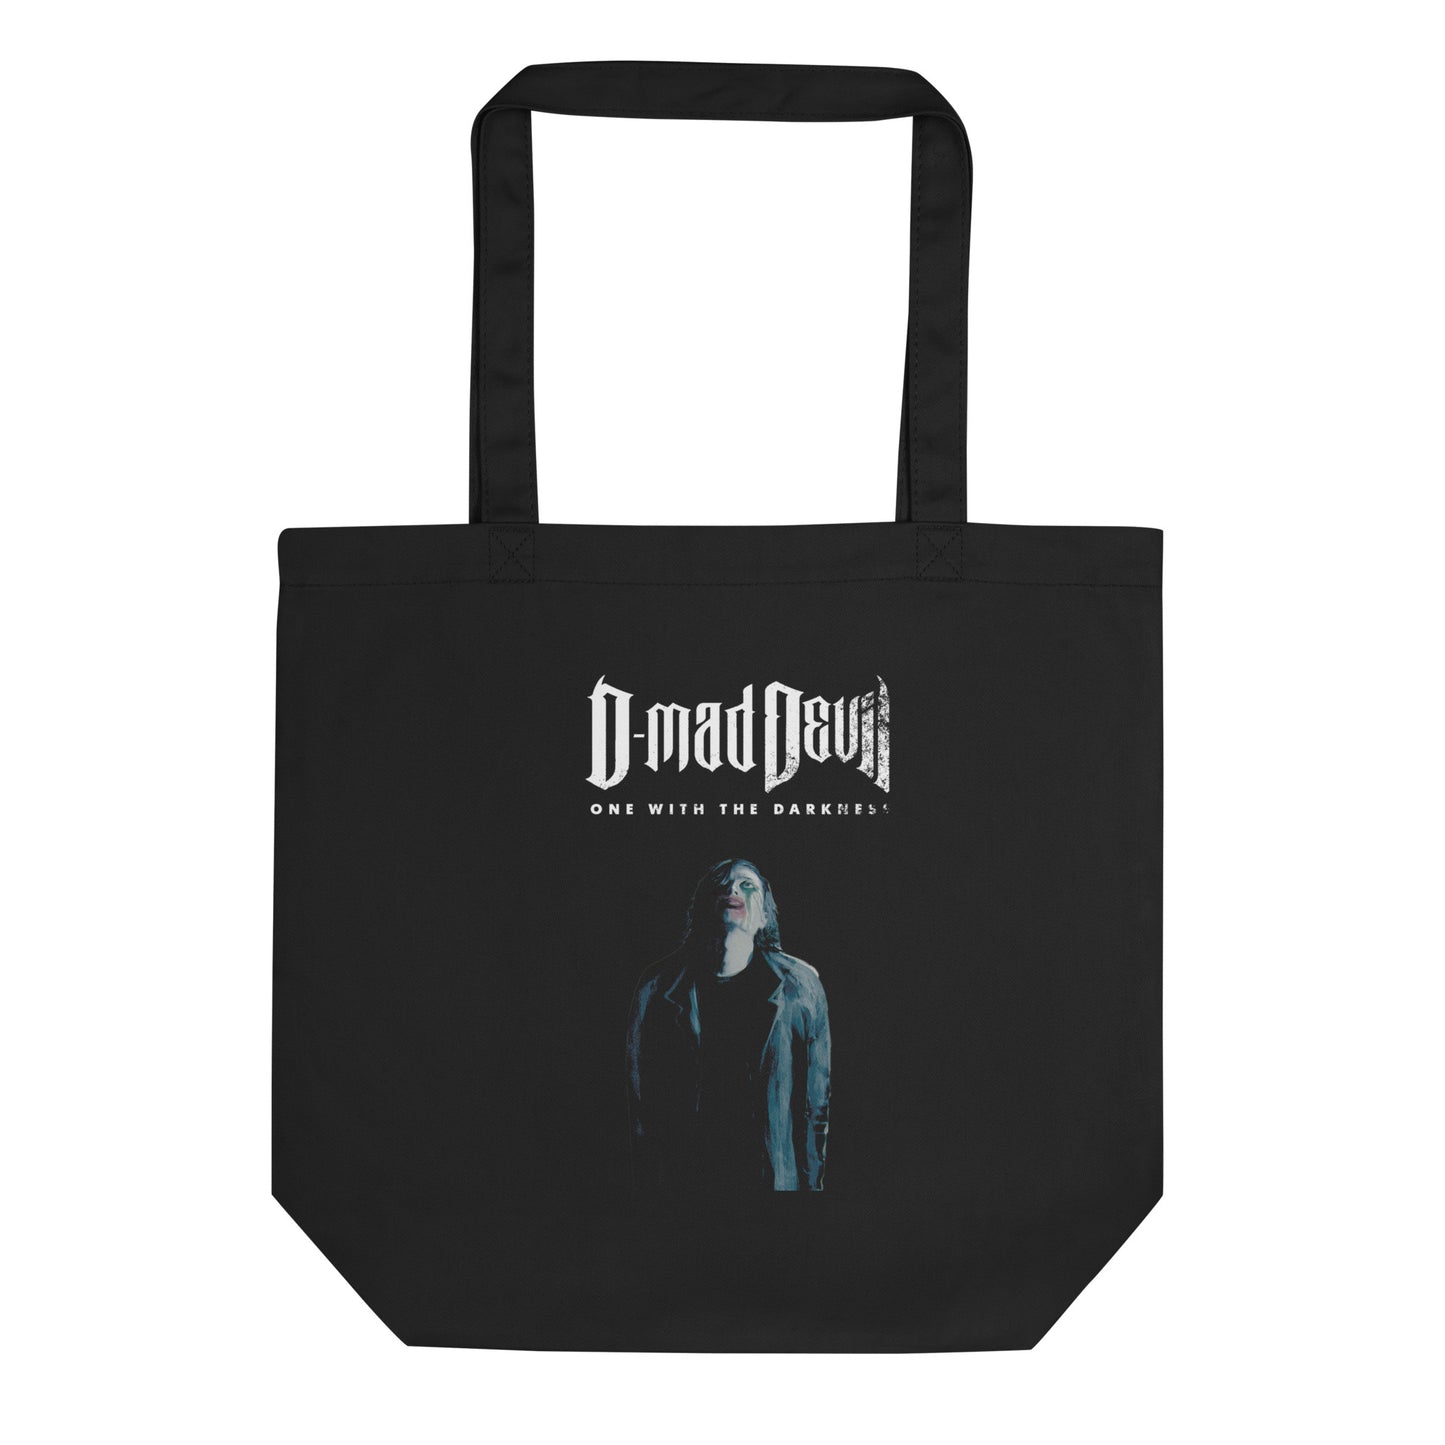 One With the Darkness Eco Tote Bag (Black)